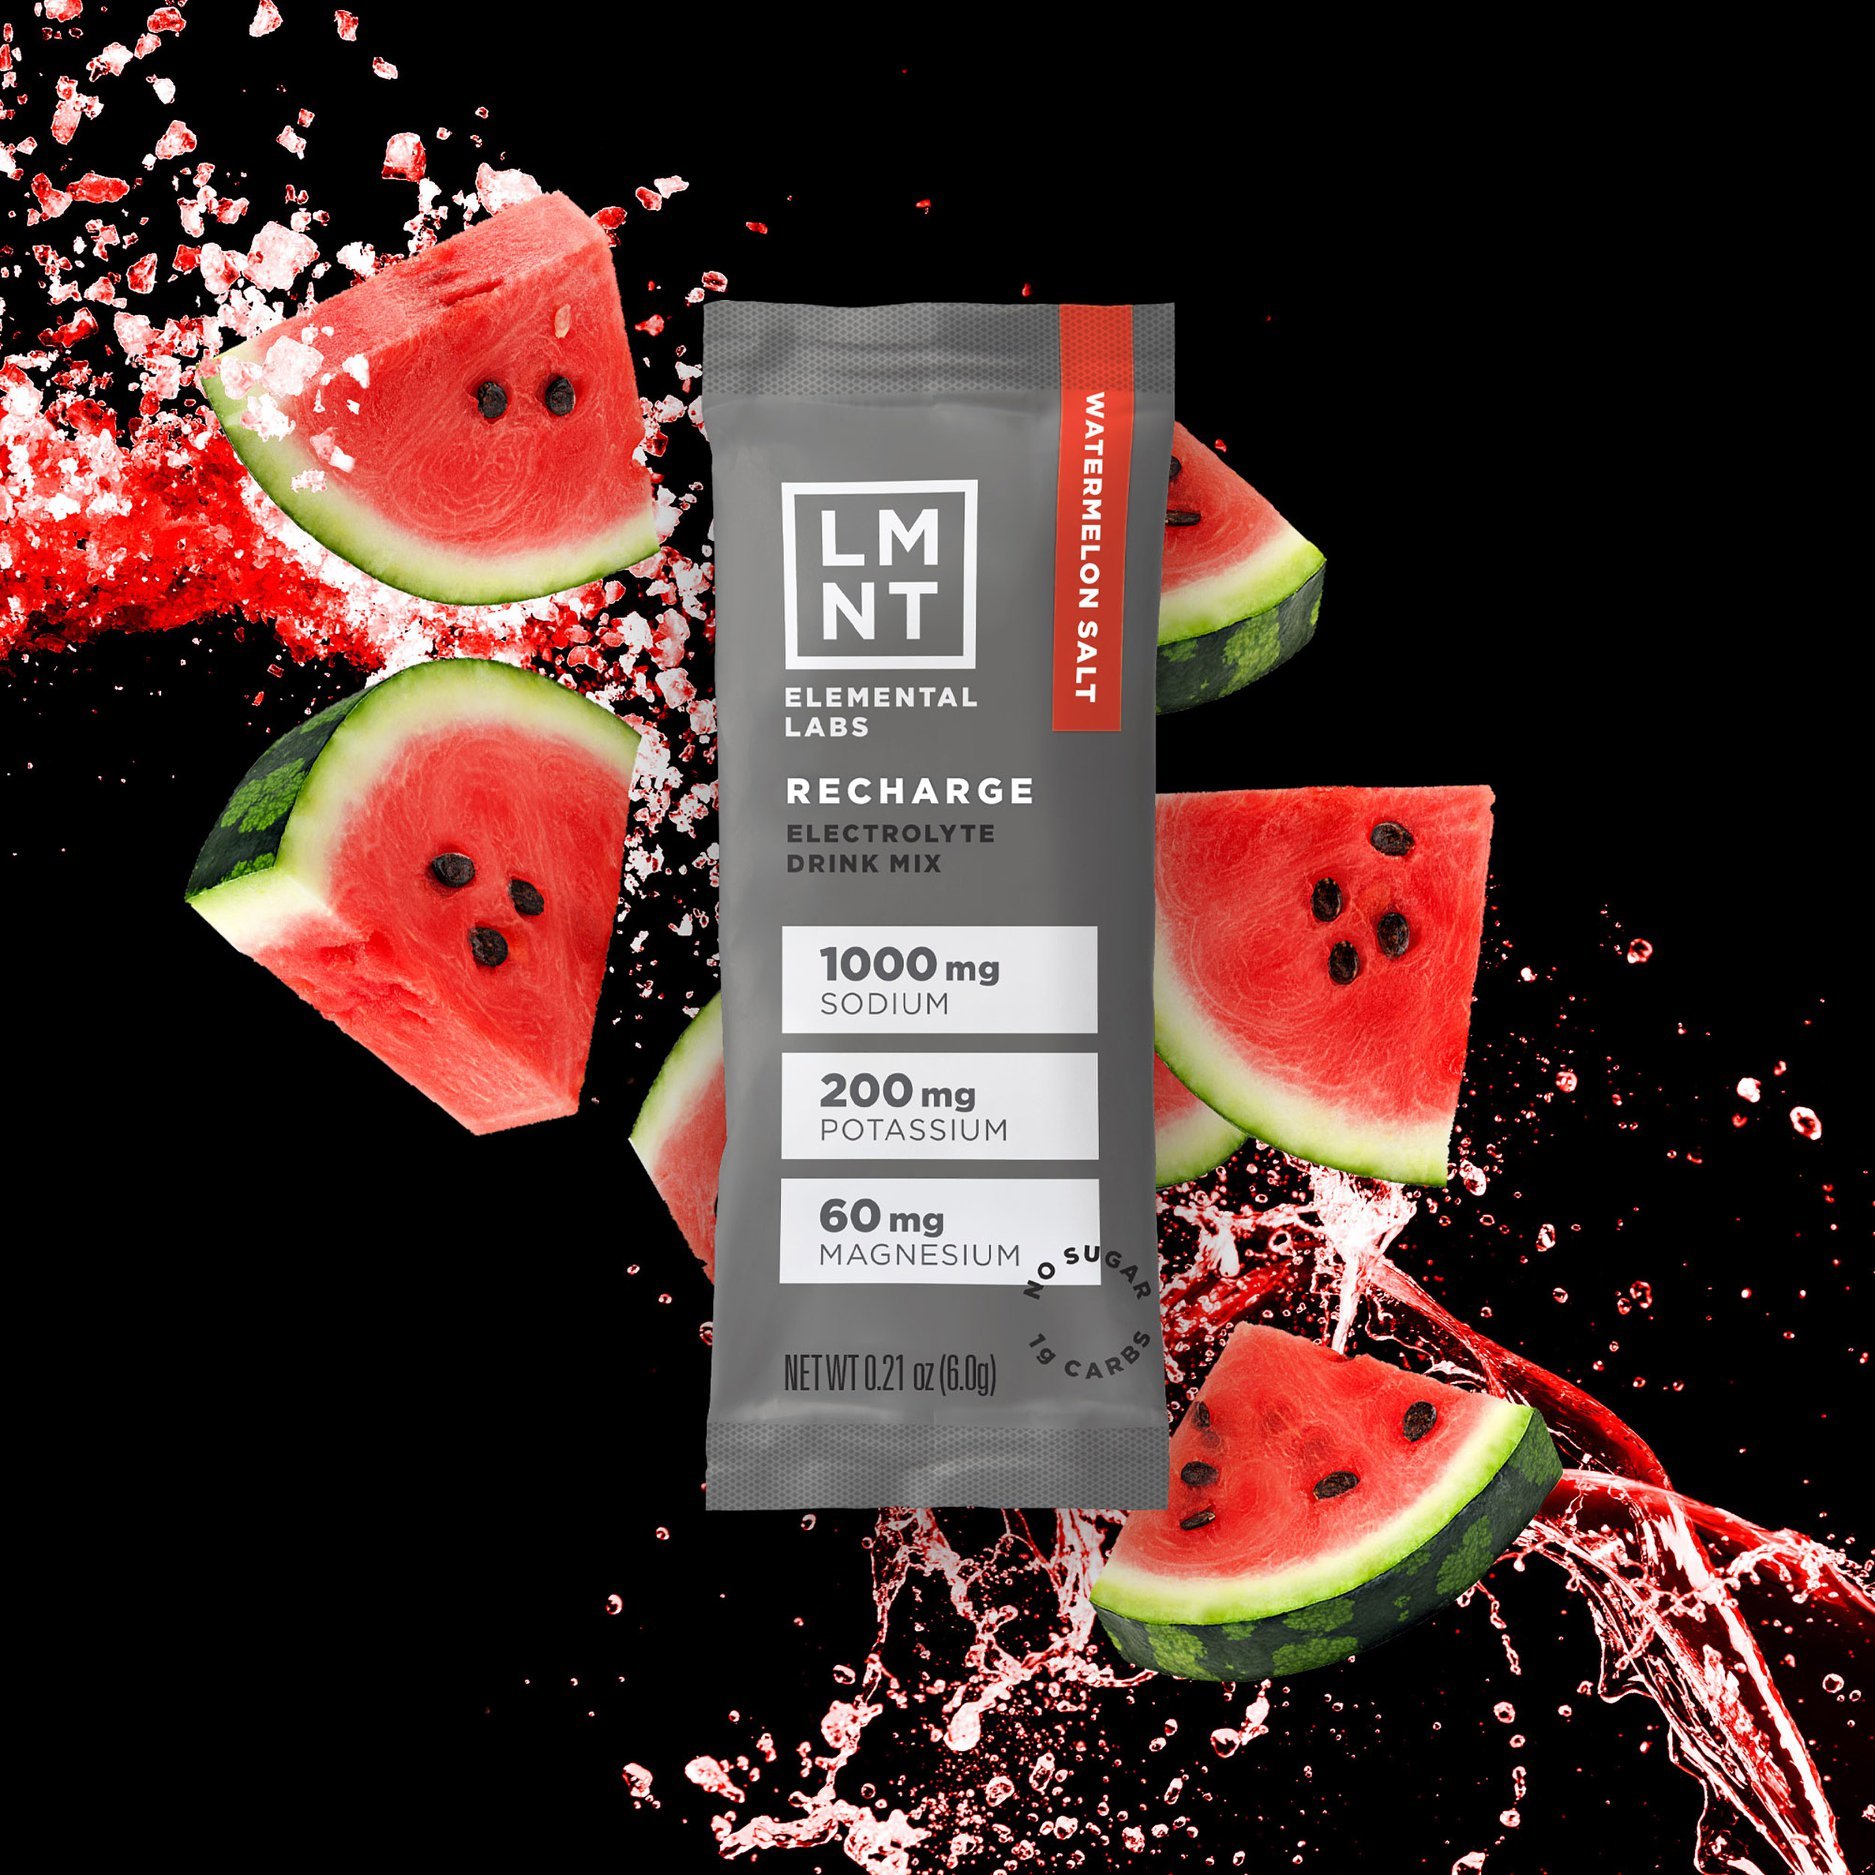 Have you tried LMNT yet? It's a tasty electrolyte drink with everything you need and nothing you don't. 

Dr. Sarah's favorite flavor at the moment is Watermelon Salt! 🍉😋